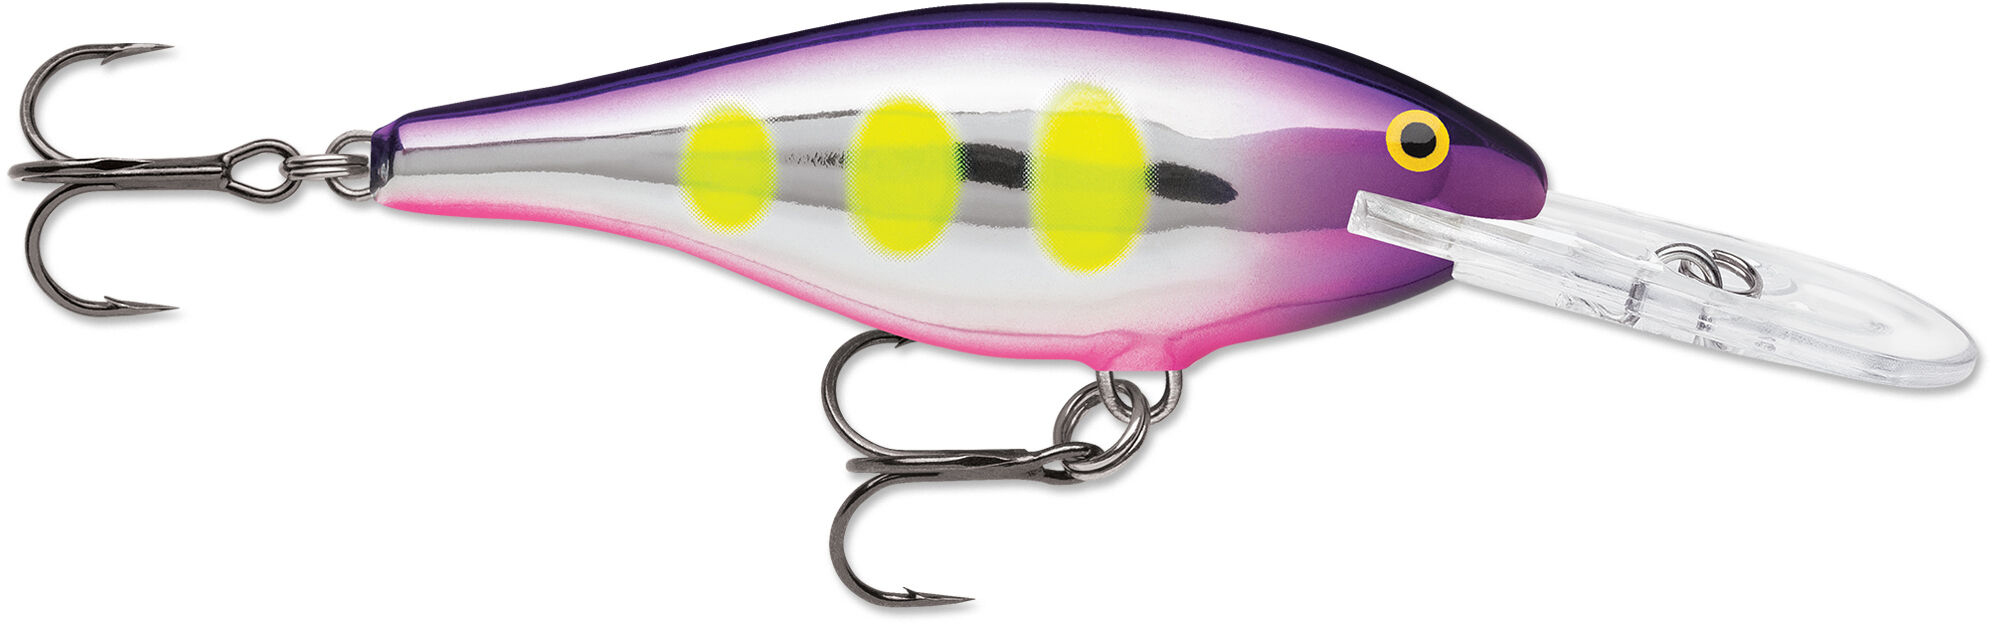 Rapala Shad Rap Crankbait 3 1/8in, 3/8 oz, Floating , Up to 20